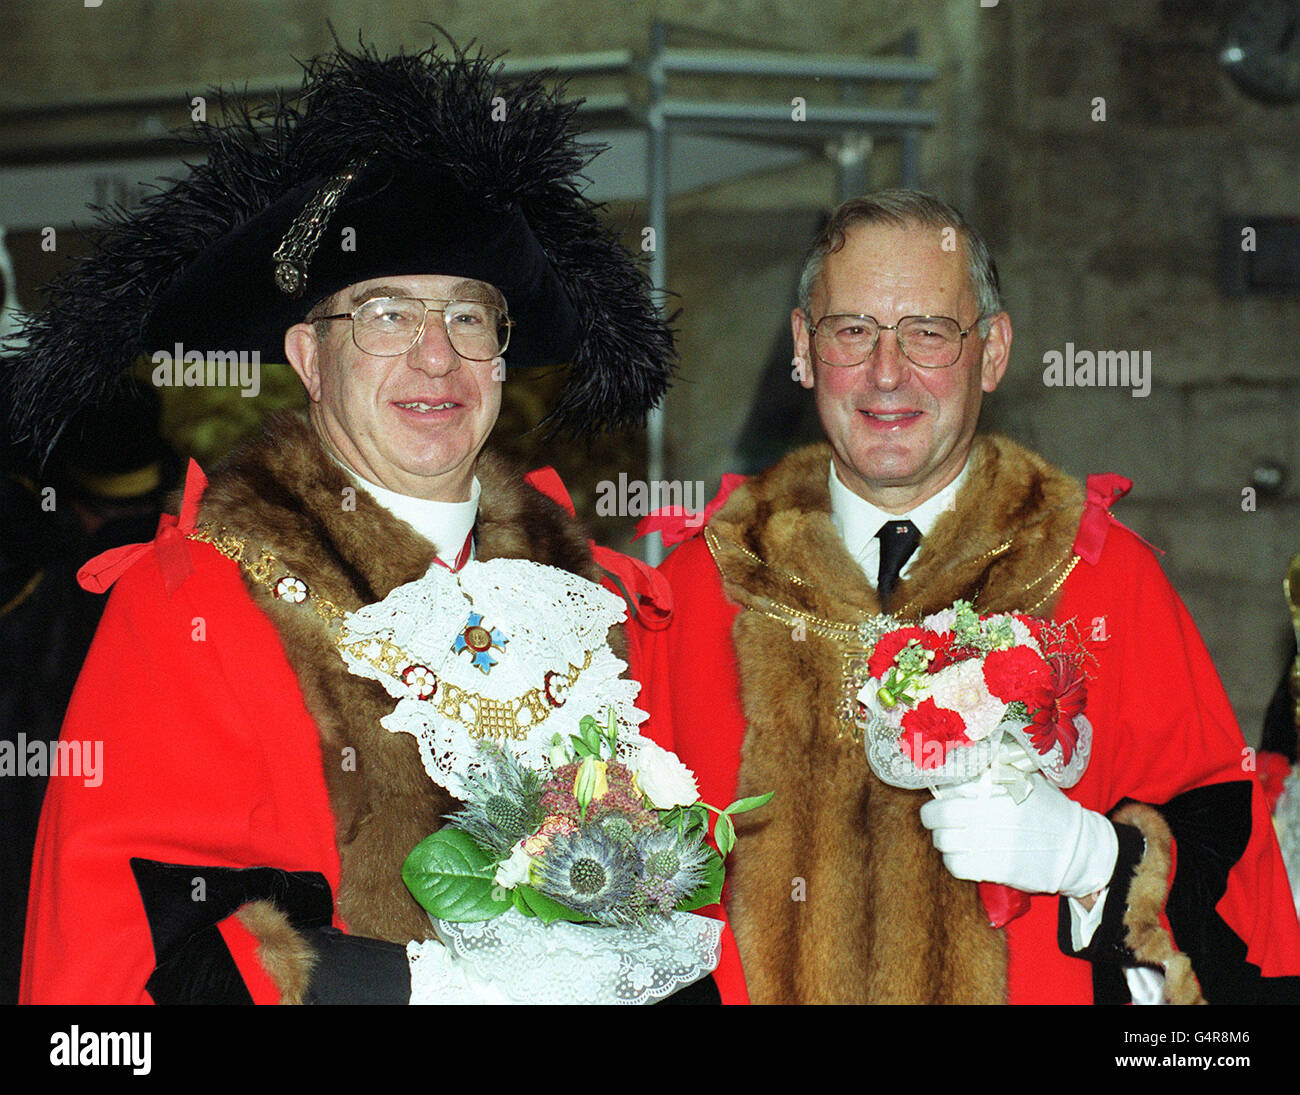 The current Lord Mayor of the City of London, Lord Levene of Portsoken (left) with the new Lord Mayor Elect Alderman Clive Martin OBE at the Guildhall in London. Mr Martin will be admitted to office on Friday 12 November 1999 during the Silent Ceremony. Stock Photo